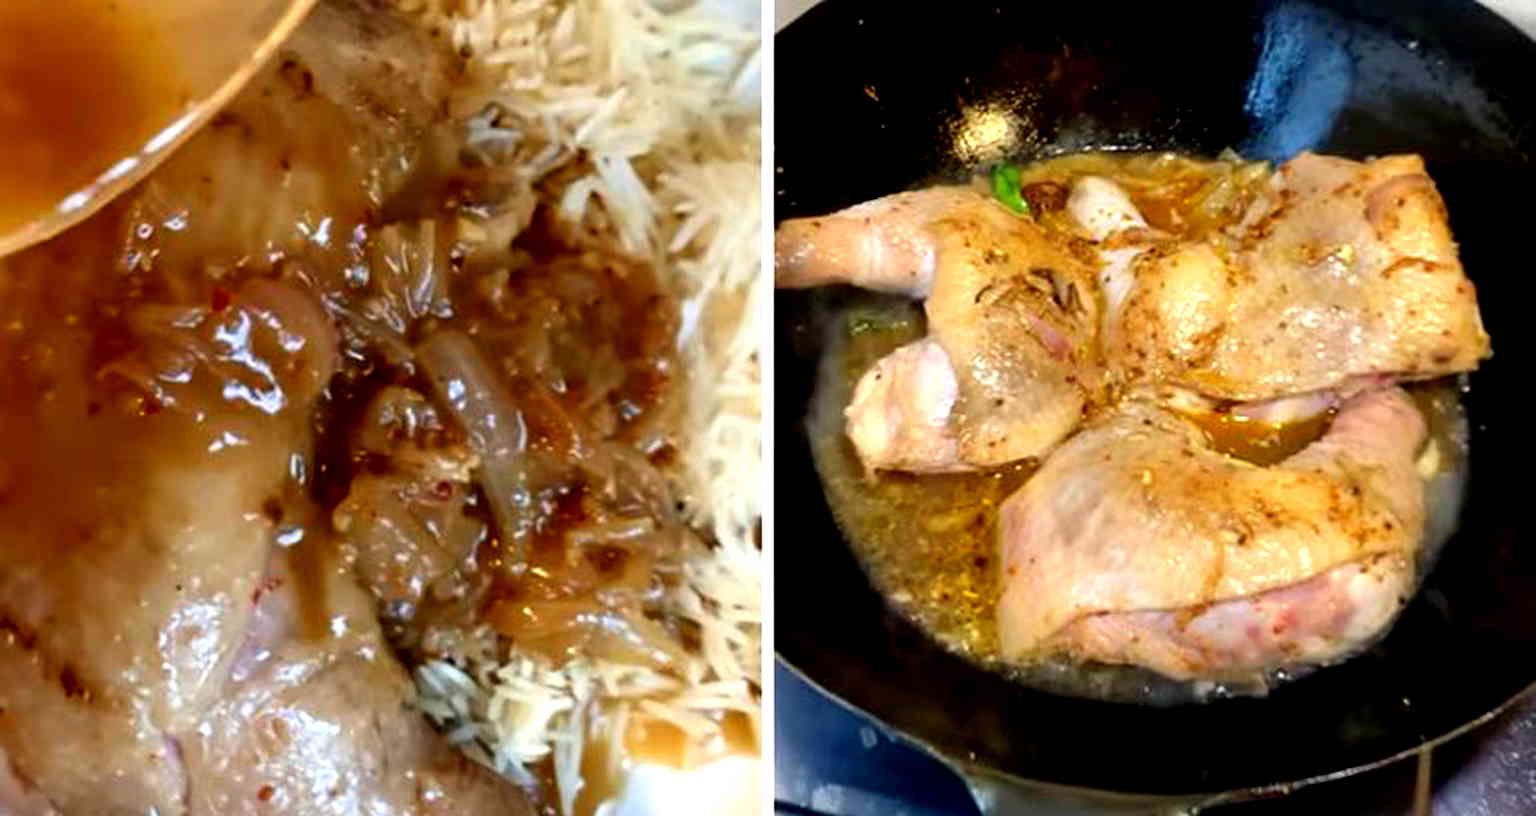 ‘Delete this right now’: New York Times’ Singaporean Chicken Curry dish savaged online